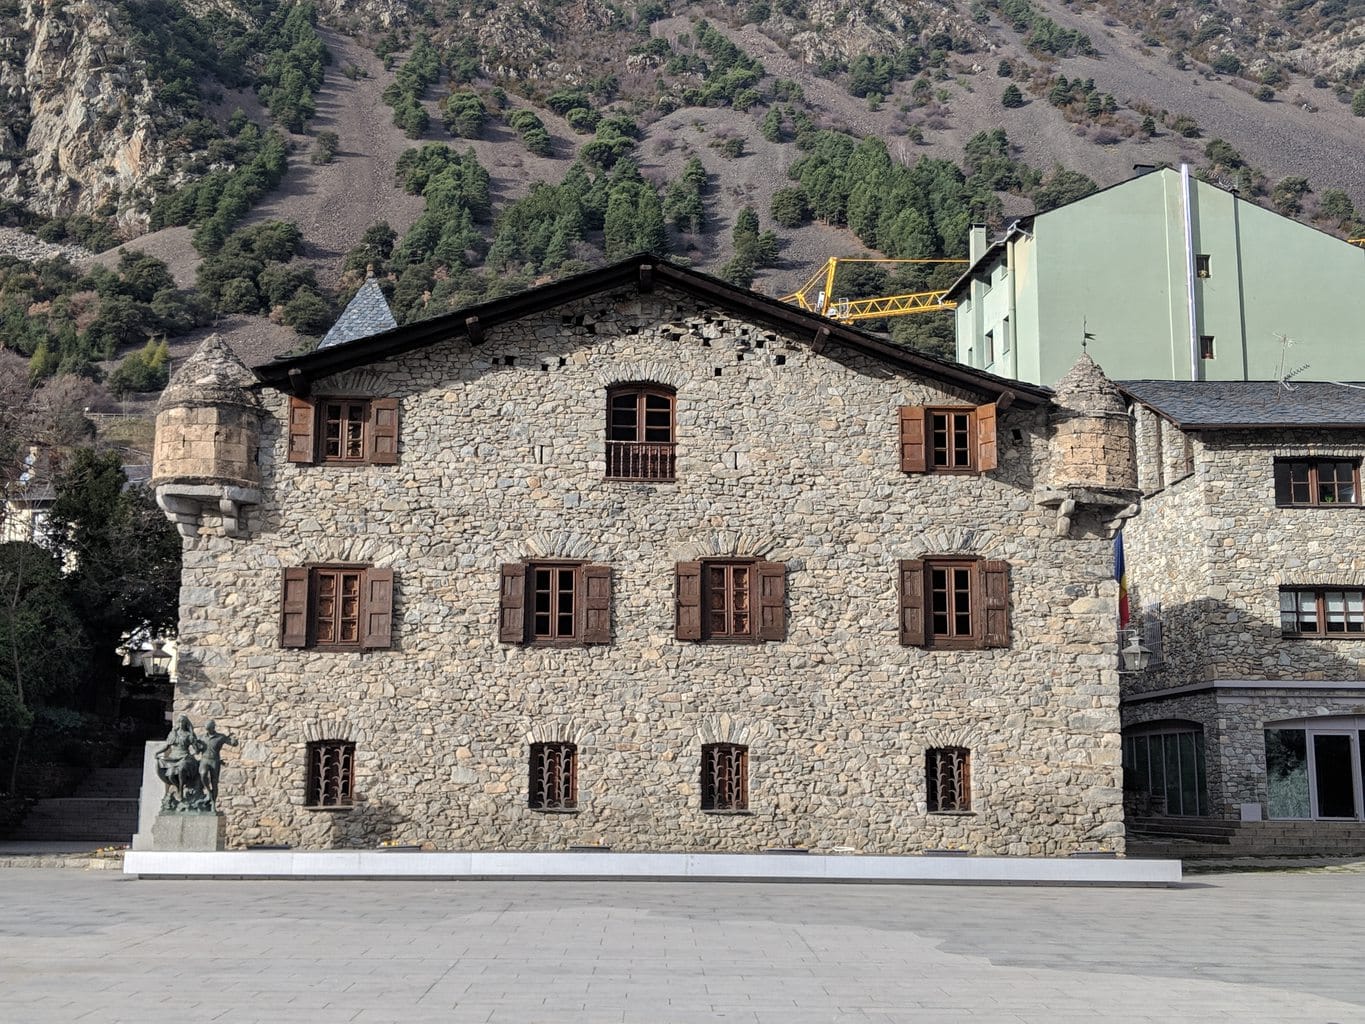 travel to andorra from spain